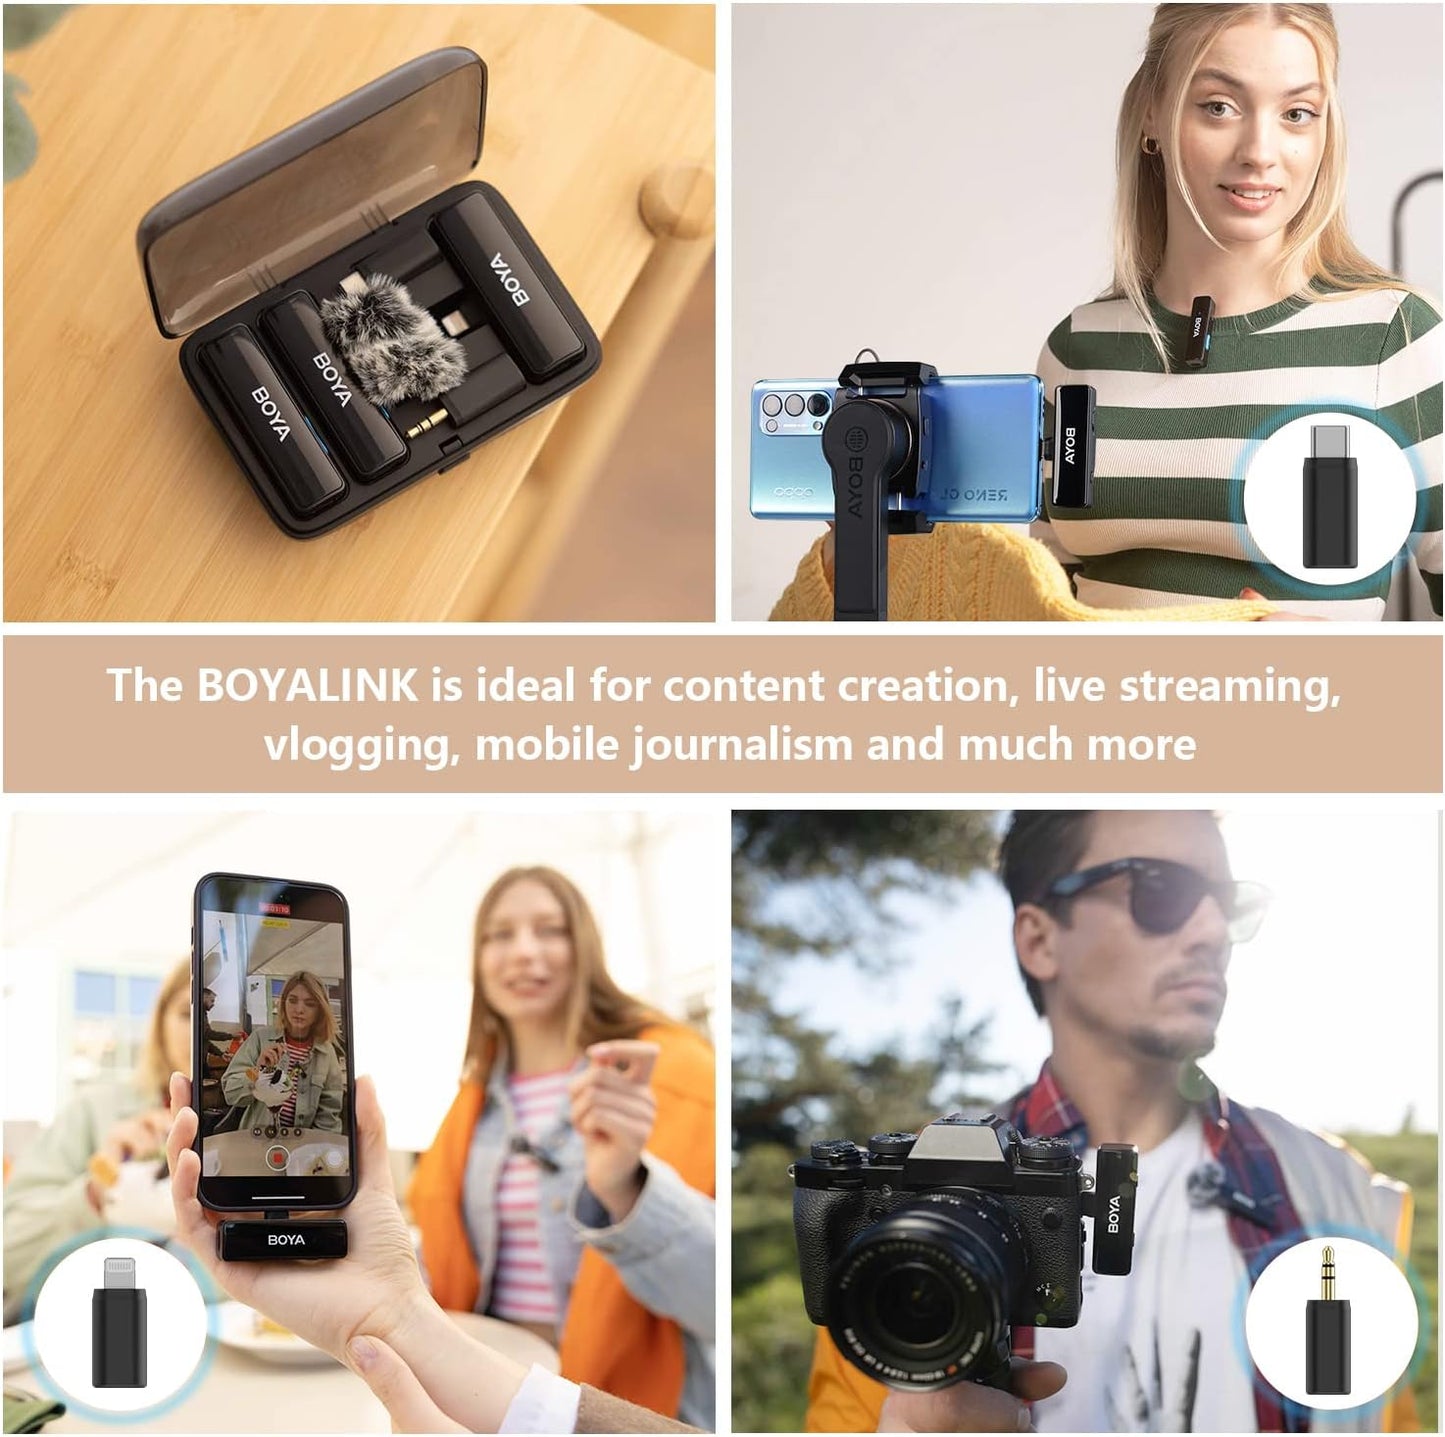 BOYA BOYALINK Wireless Lavalier Microphone for iPhone/Android/Camera Vlogging, All-in-One Lapel Dual Mic System & Lightning & USB-C Inputs & Battery Case for Smartphones/DSLR in YouTube Faceb